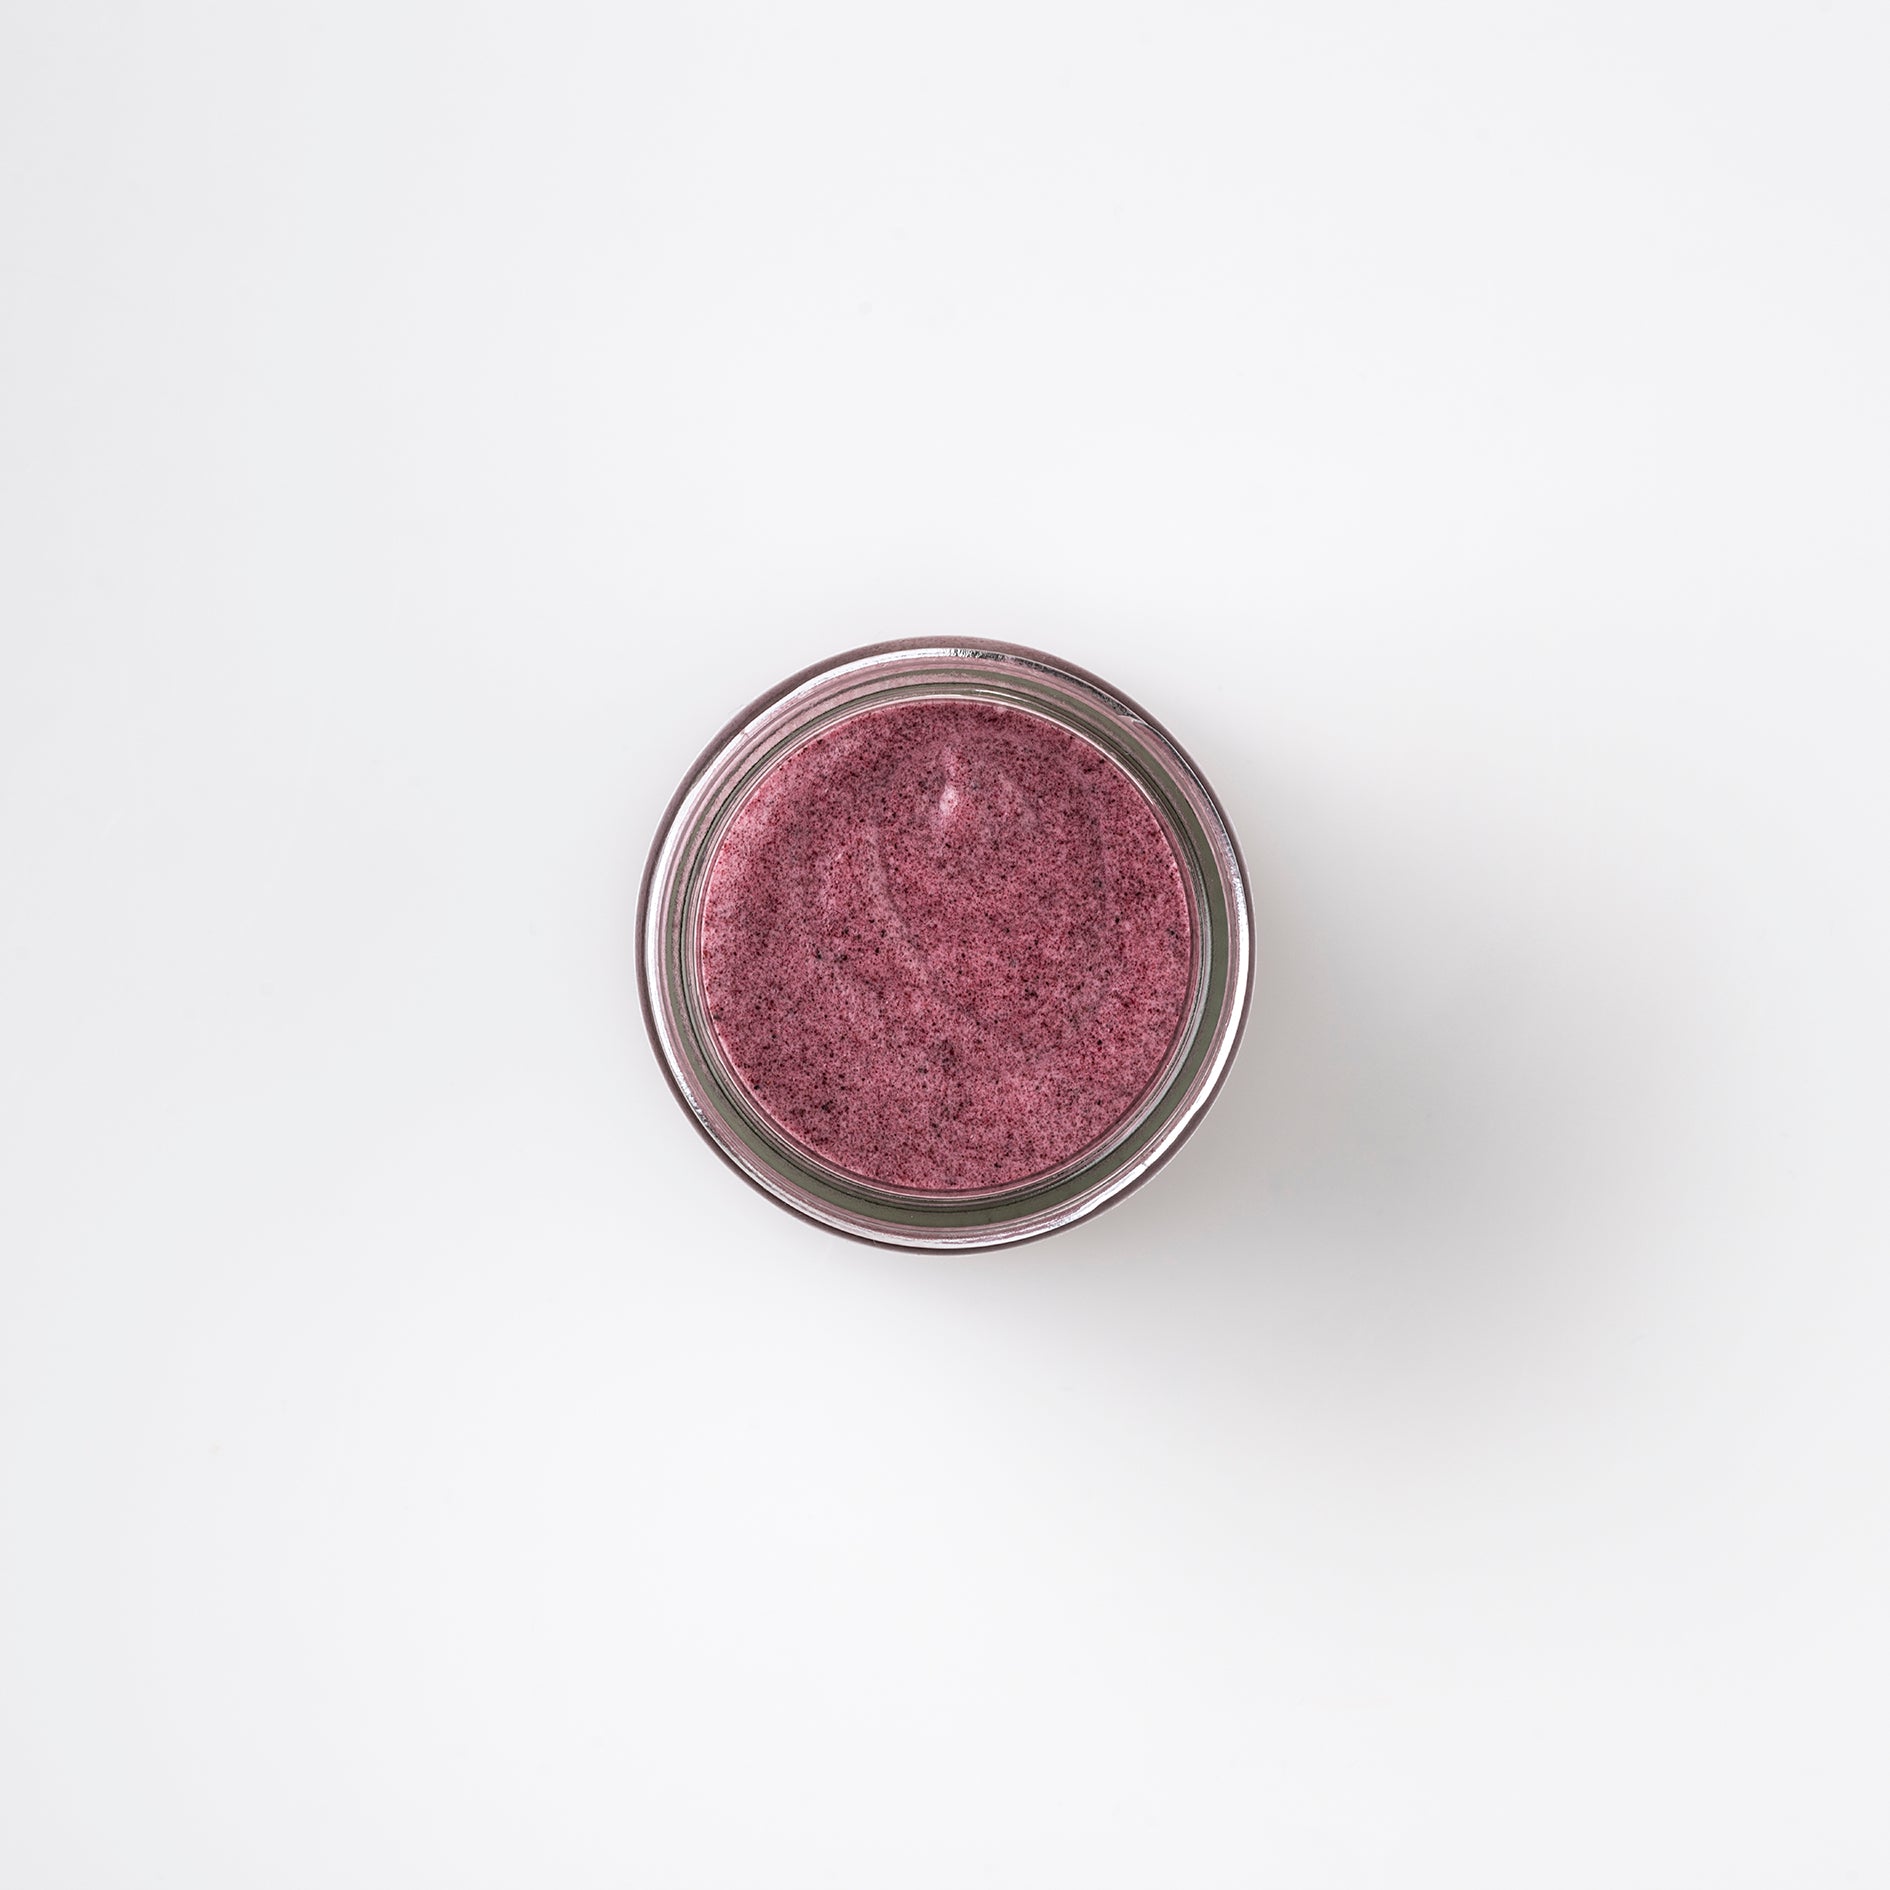 the top view of Bristolmade Beetroot face scrub, showing the deep pink, natural ingredients and the exfoliating particles.